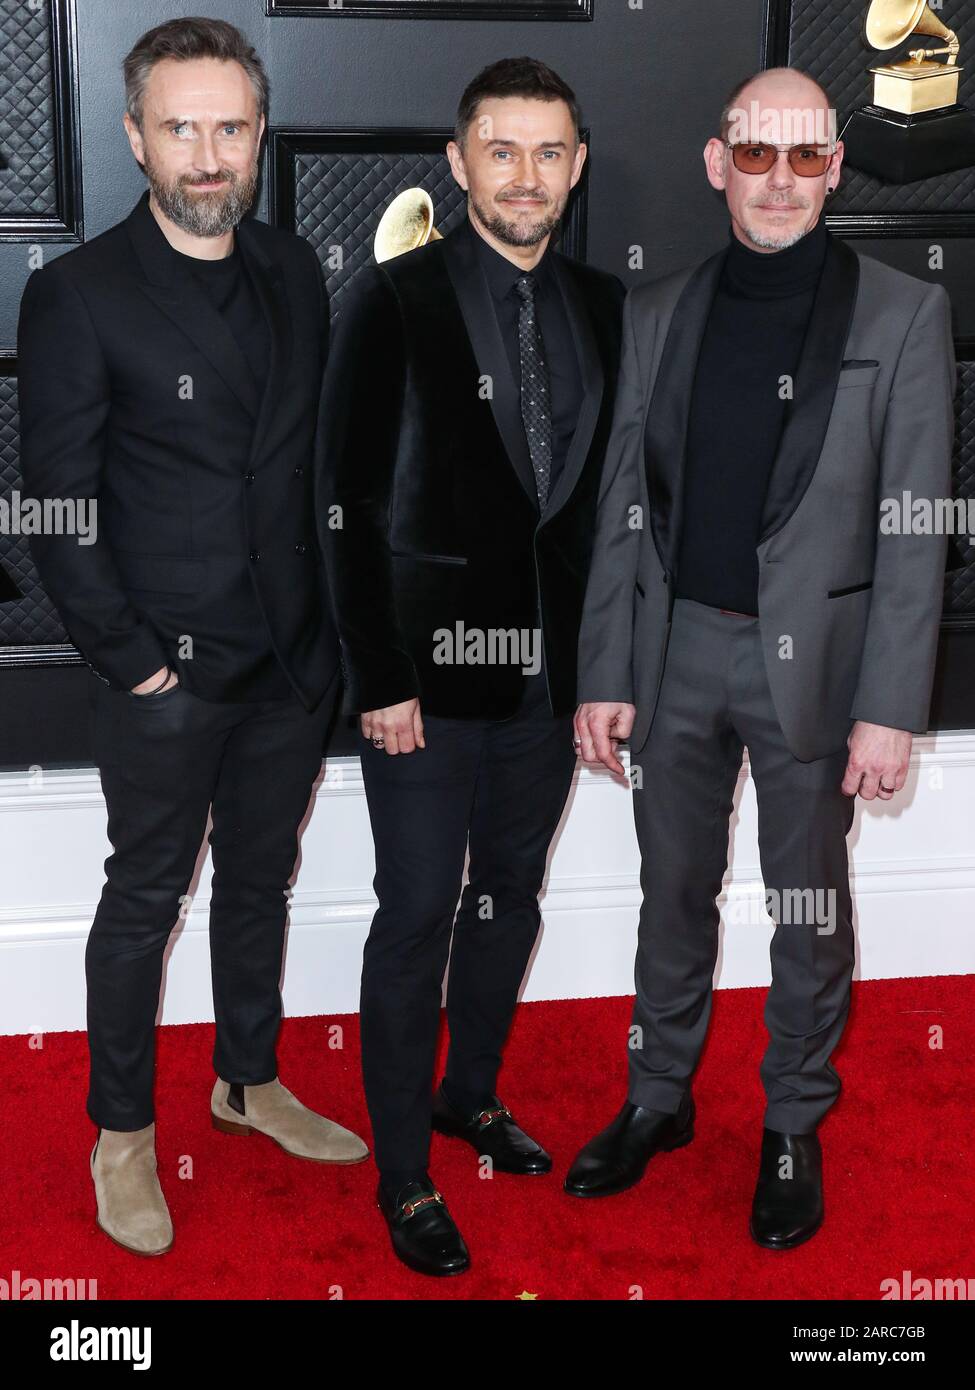 LOS ANGELES, CALIFORNIA, - JANUARY 26: Noel Hogan, Michael Gerard Hogan and Fergal Lawler of The Cranberries arrive at the 62nd Annual GRAMMY Awards at Staples Center on January 26,